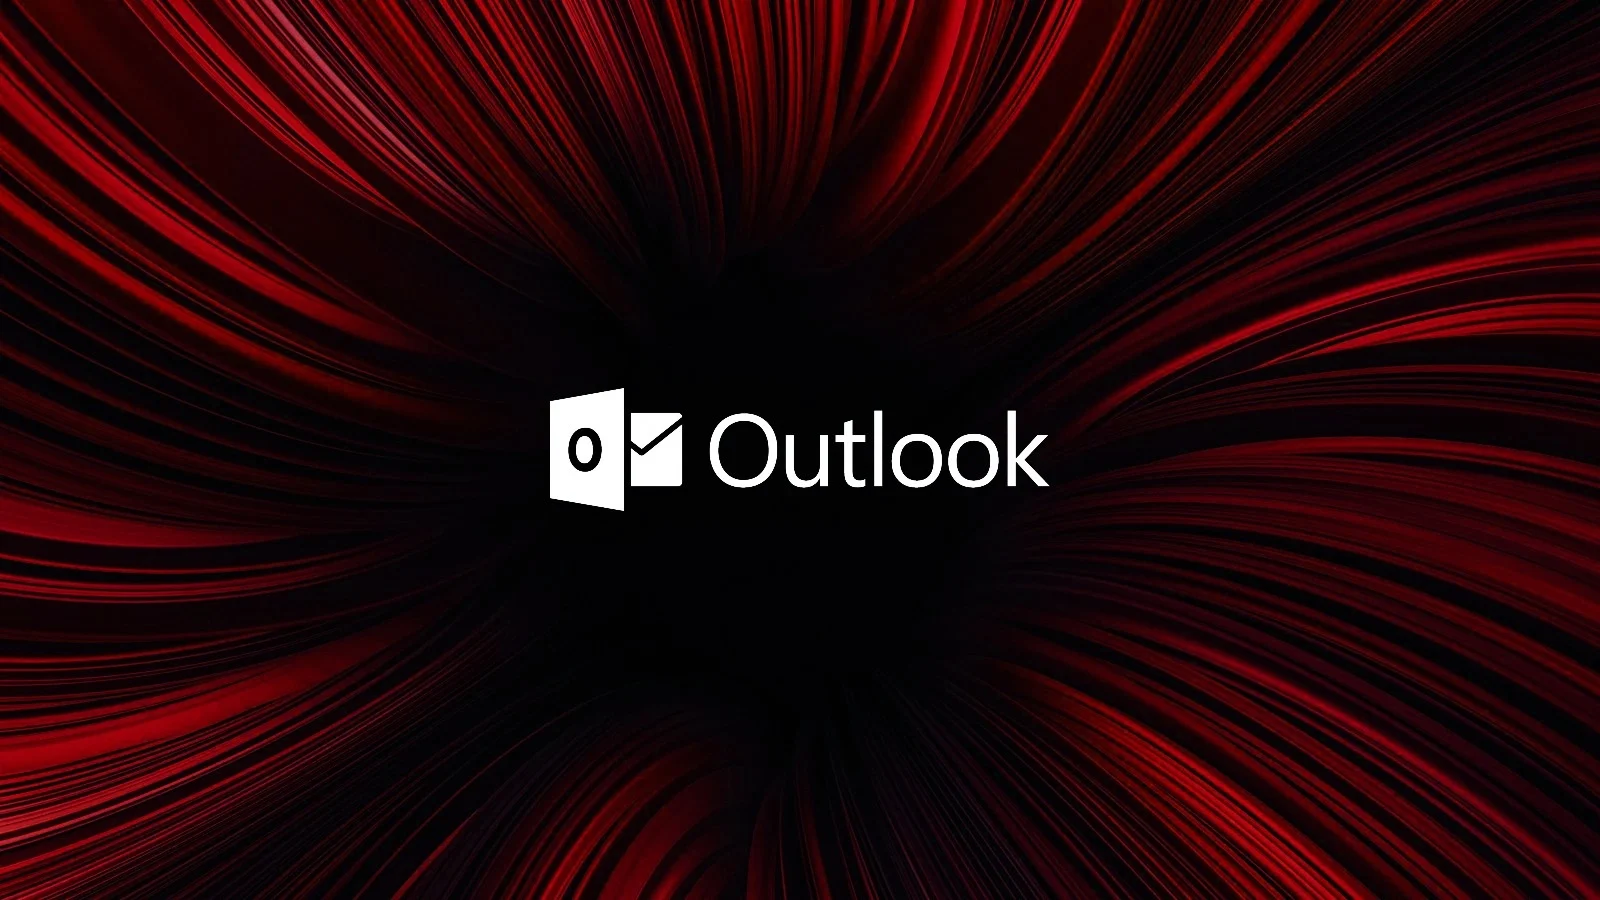 Outlook_headpic_red